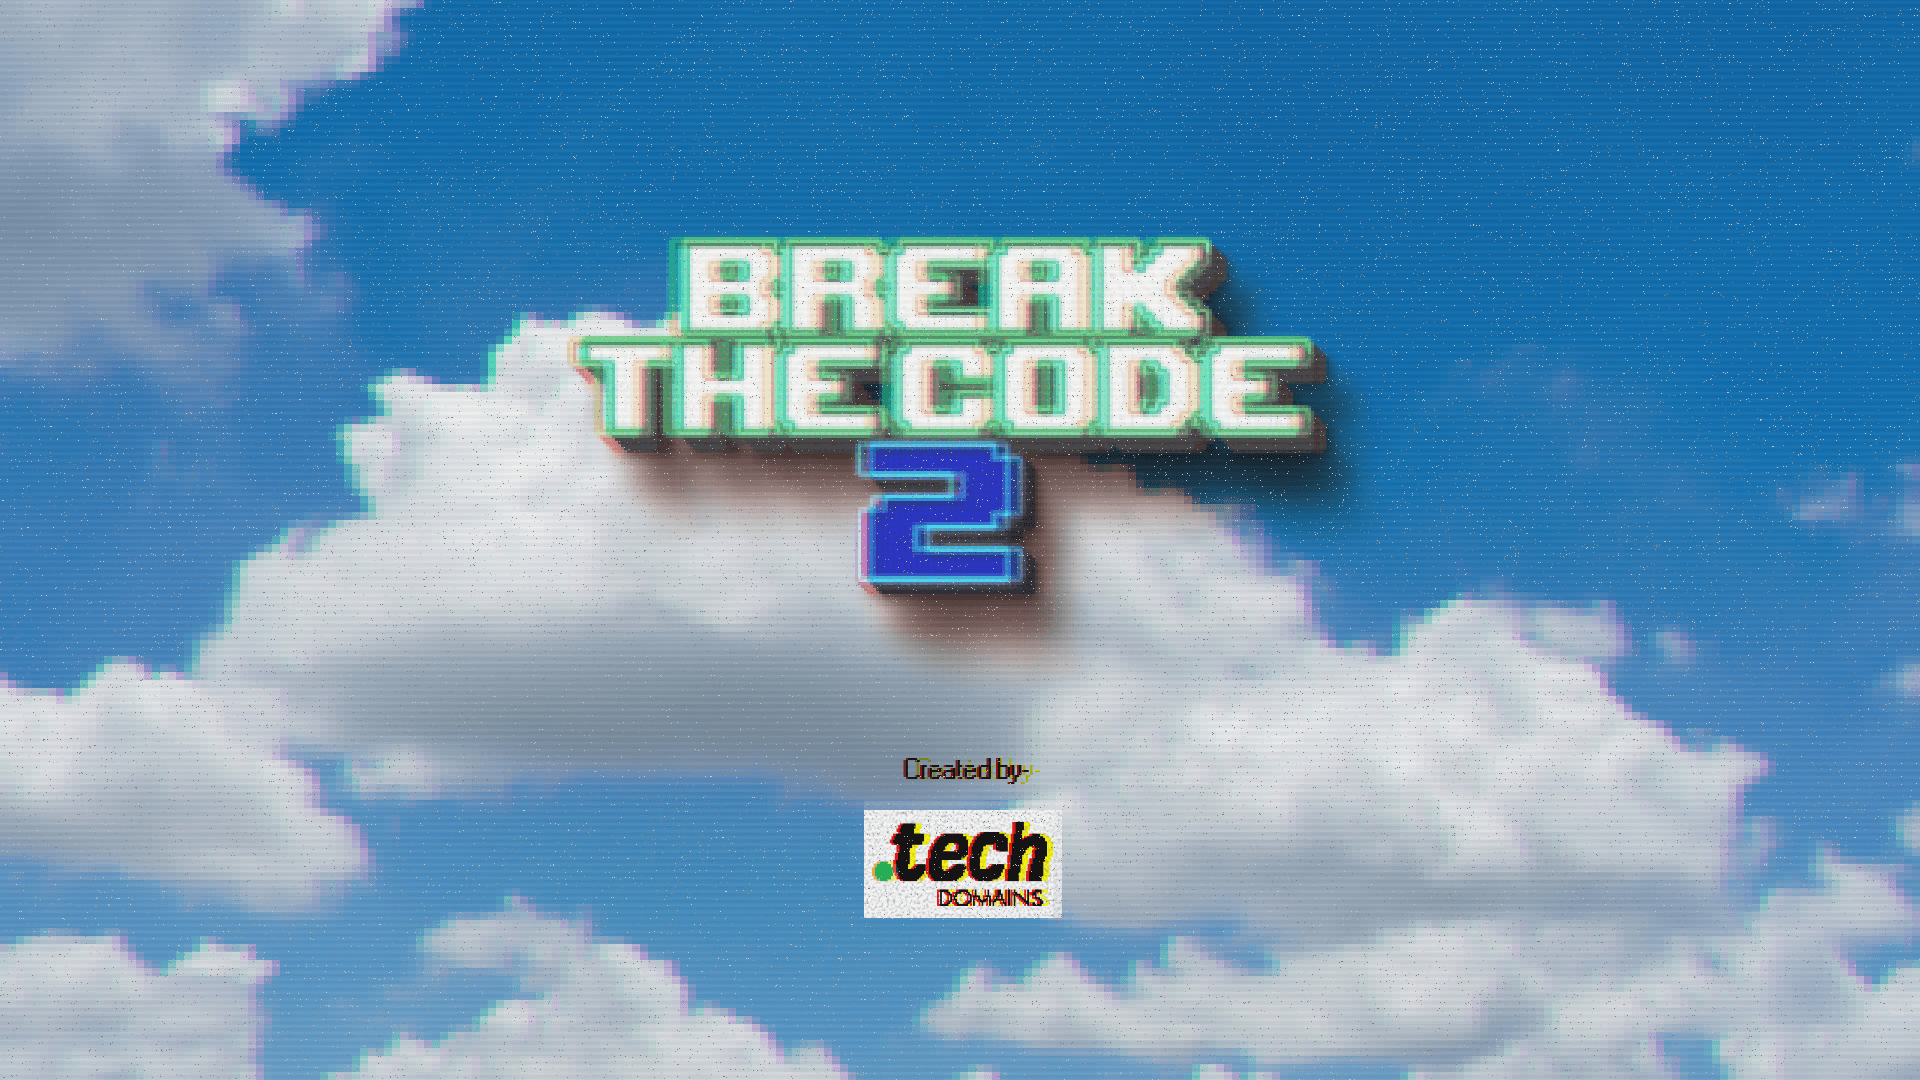 Break The Code 2.0: A Browser Game Where You Solve Missions Using Coding Skills